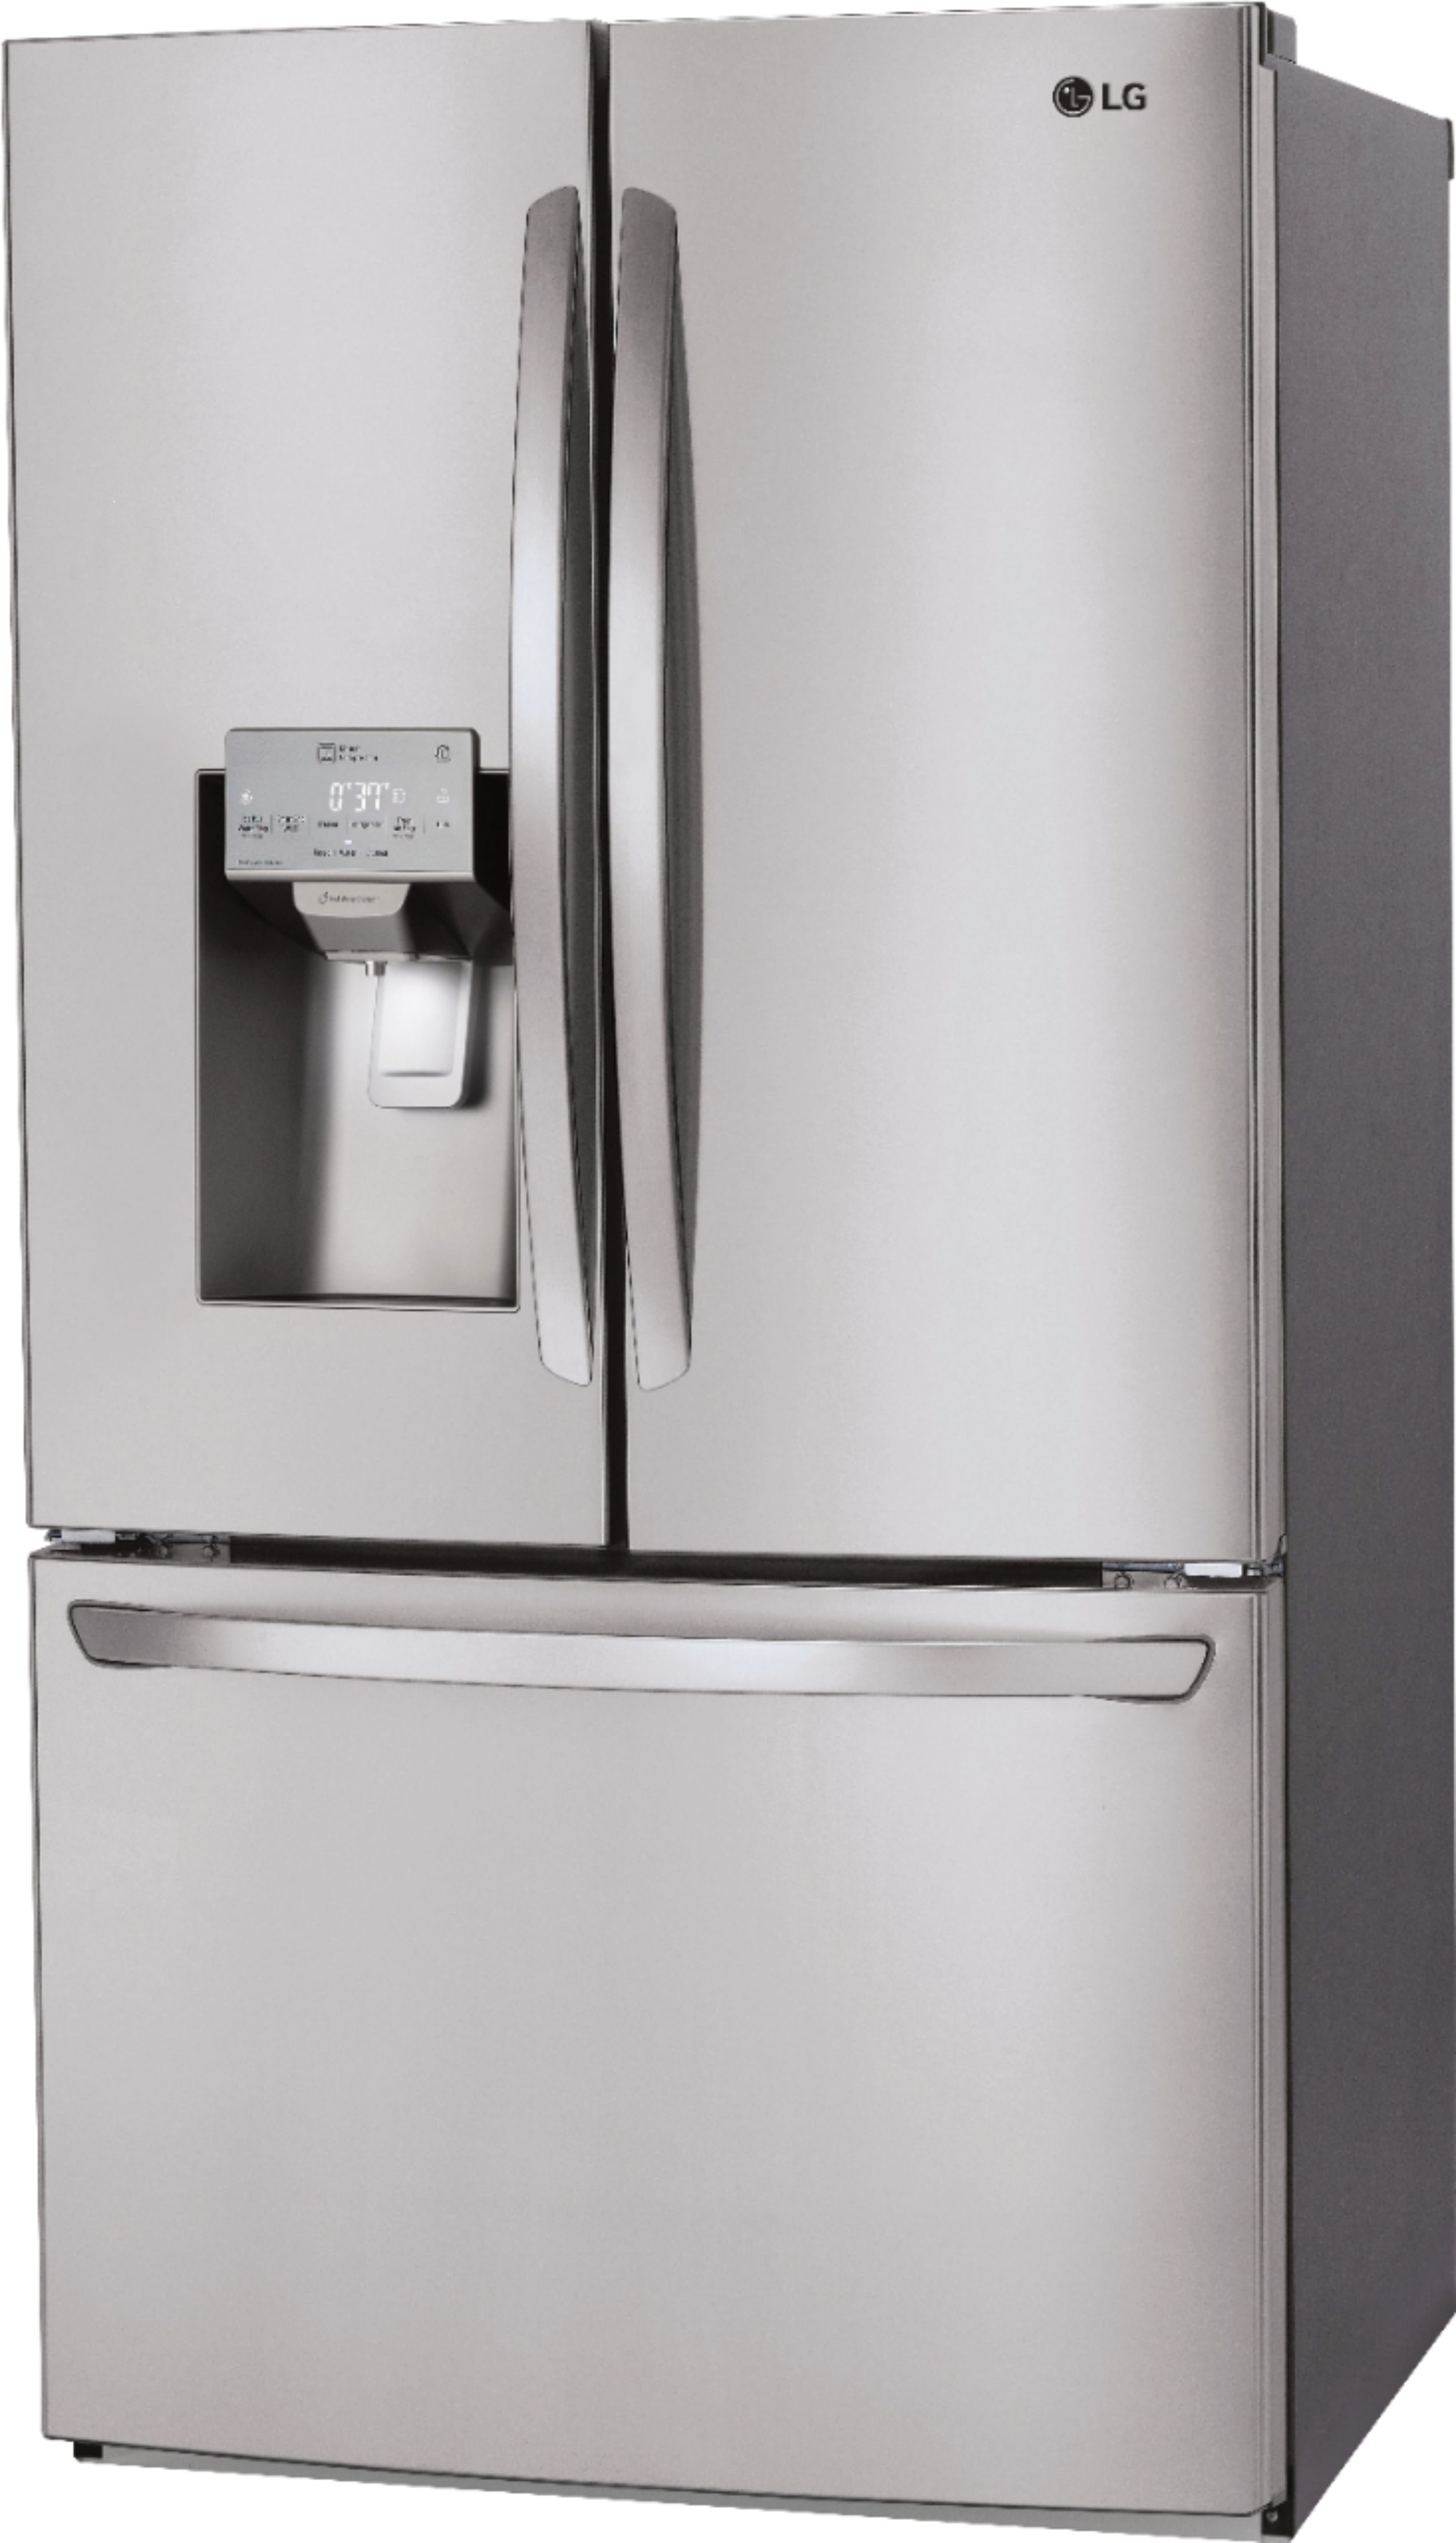 Ice maker refrigerator more than like fairy tail